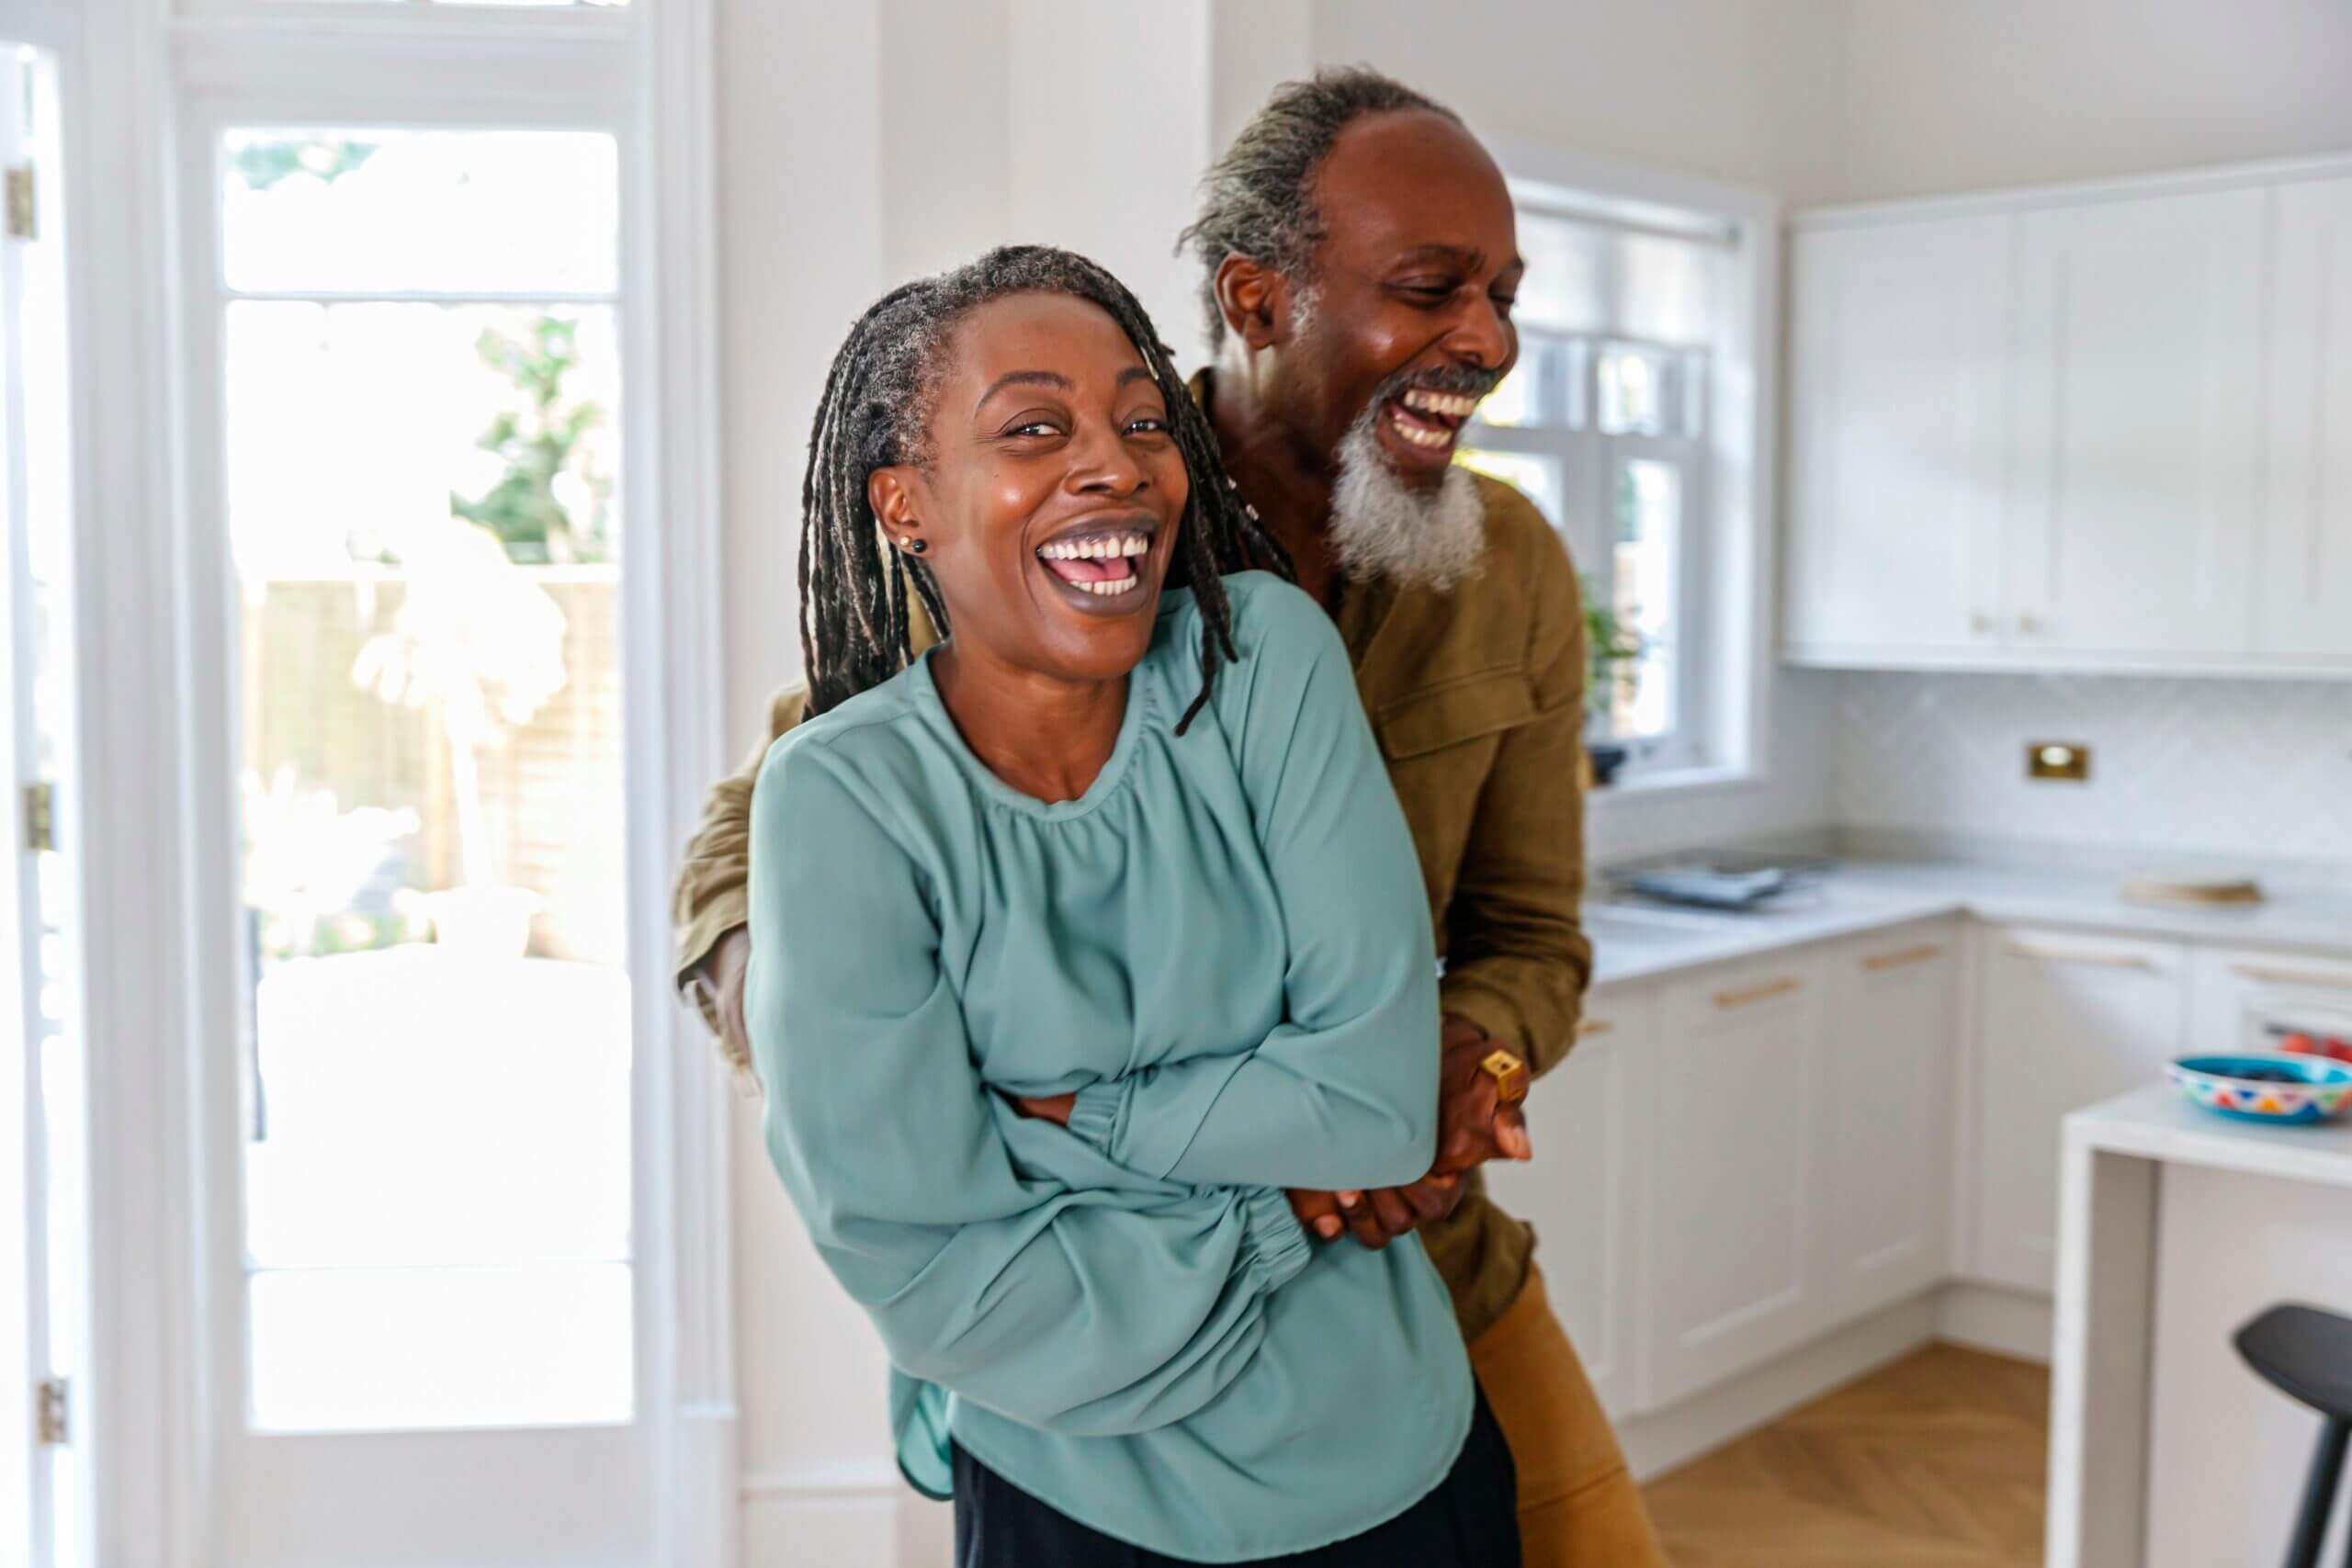 A healthy and happy black senior couple laugh while embracing. The retired active seniors are enjoying a relaxing day at home together. Aging process, retirement, family lifestyle and active seniors concepts